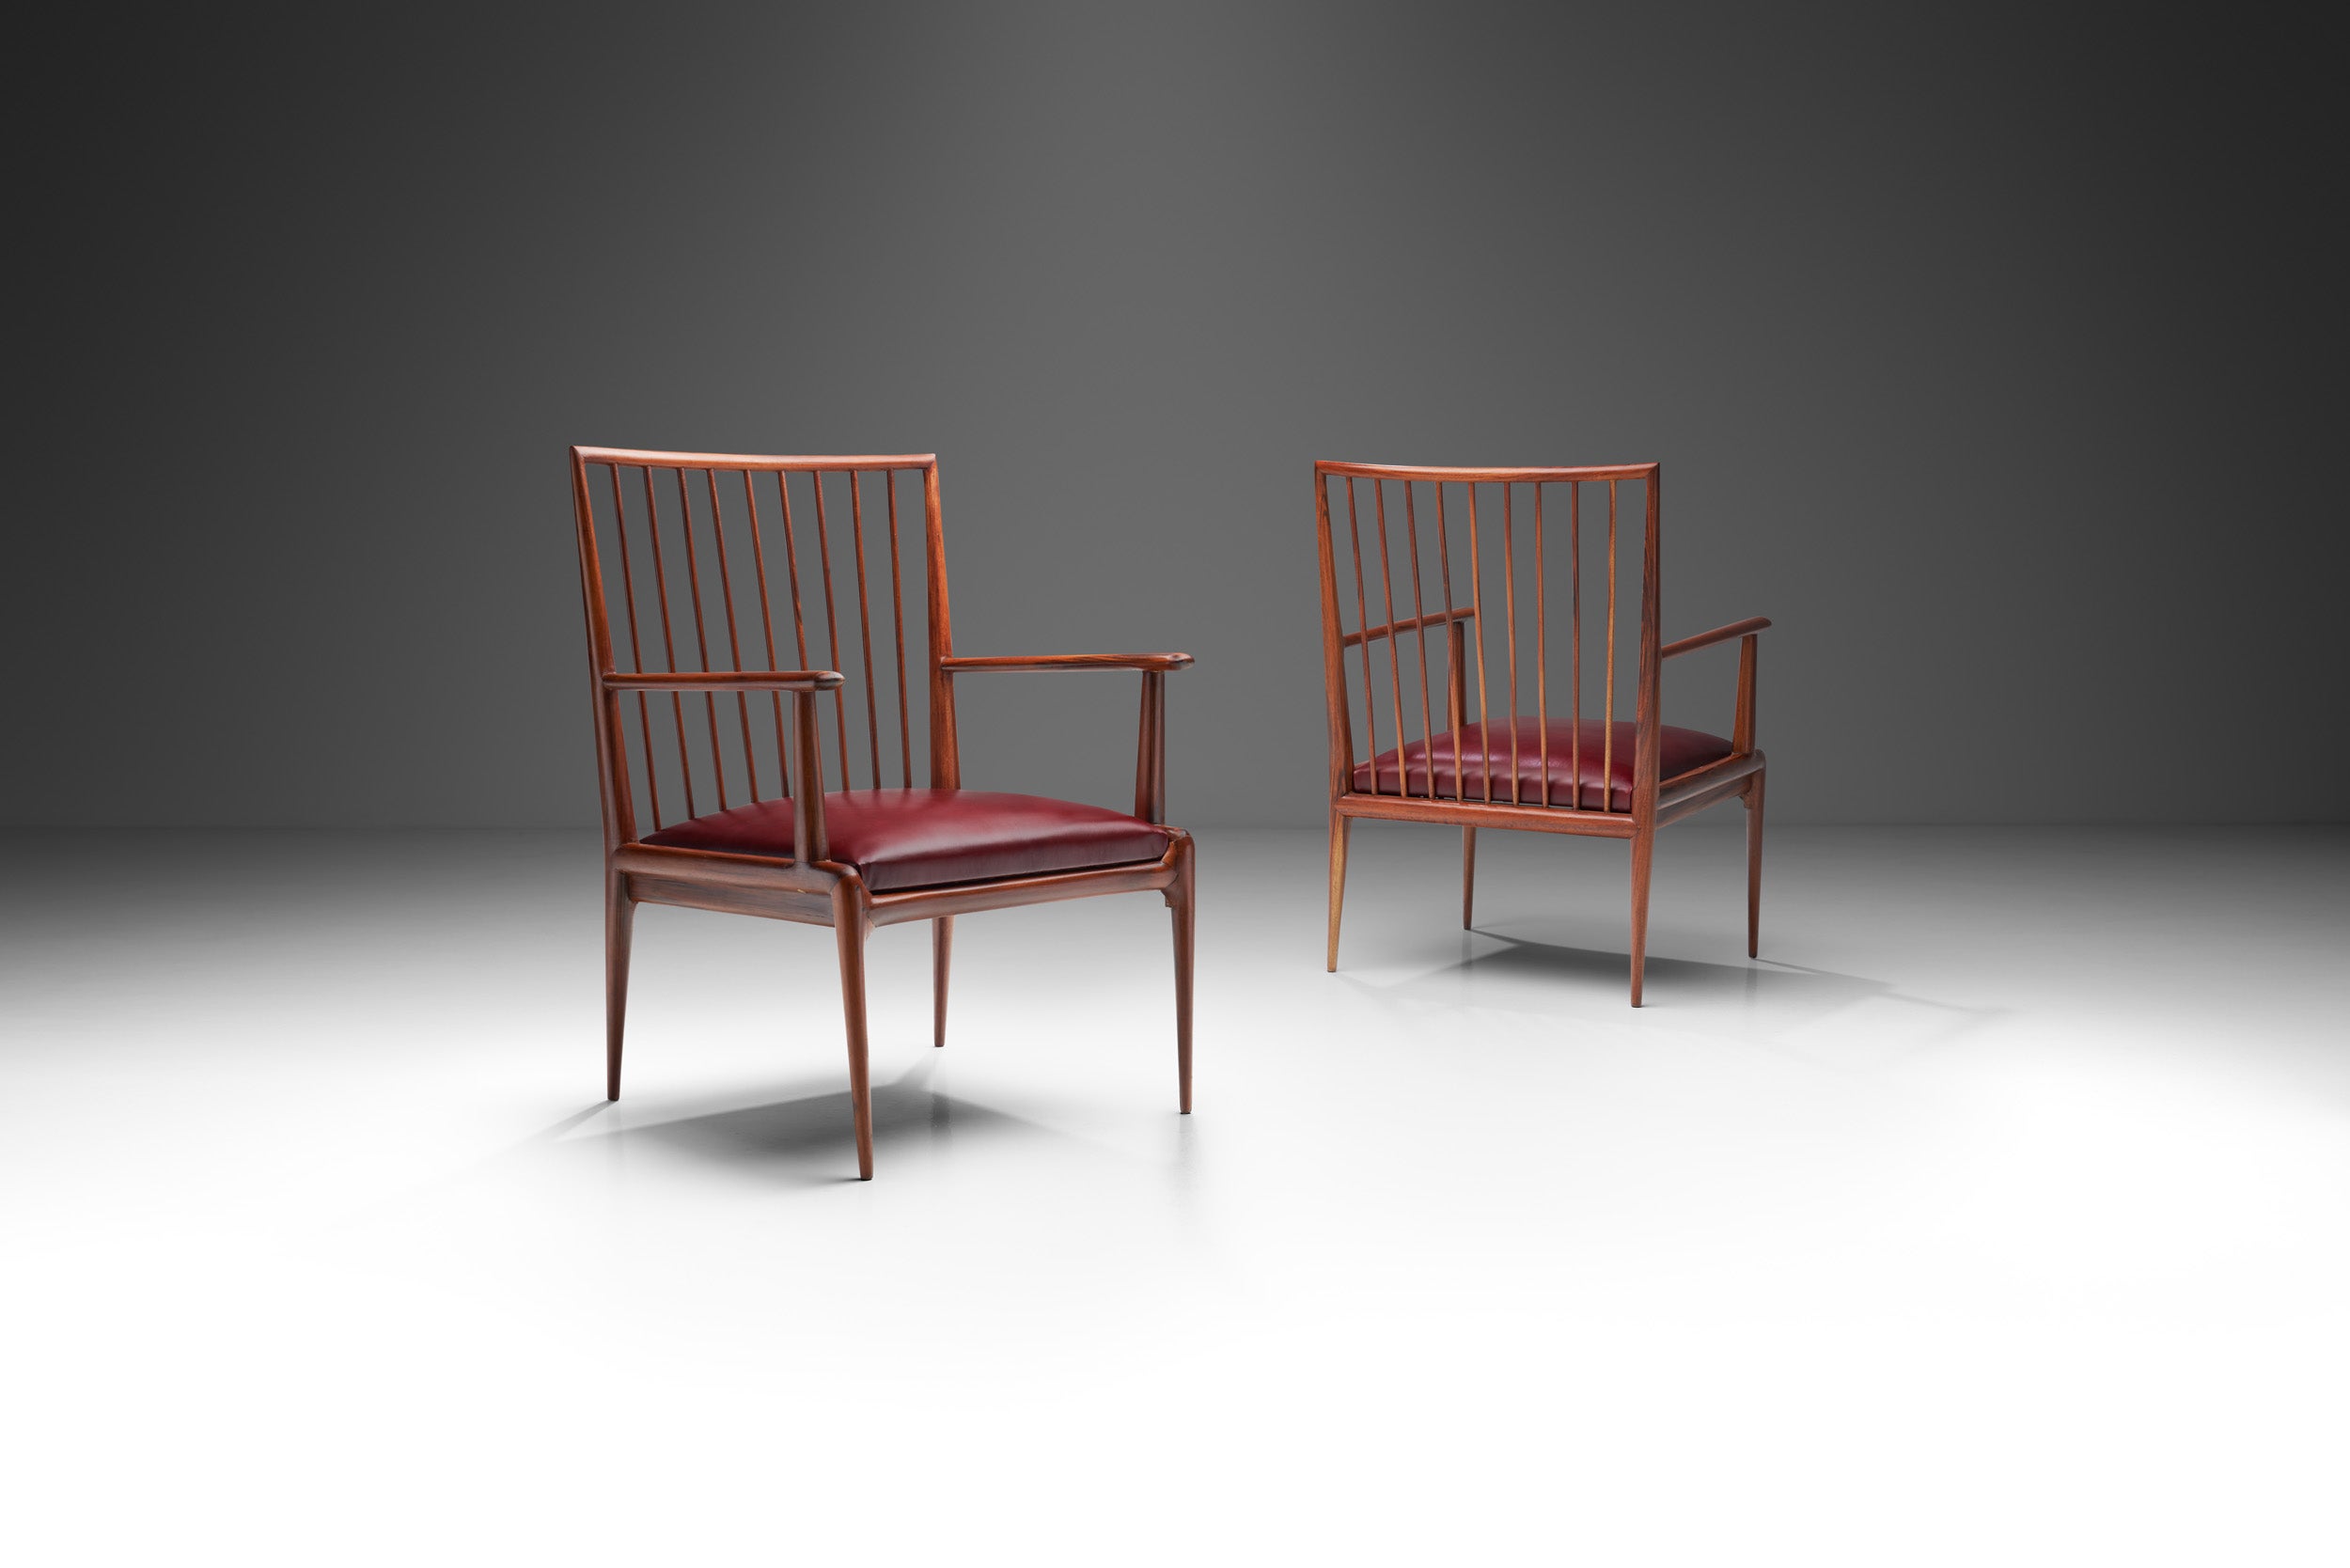 Pair of Mid-Century Chairs by Branco & Preto 'Attr.', Brazil, 1950s For Sale